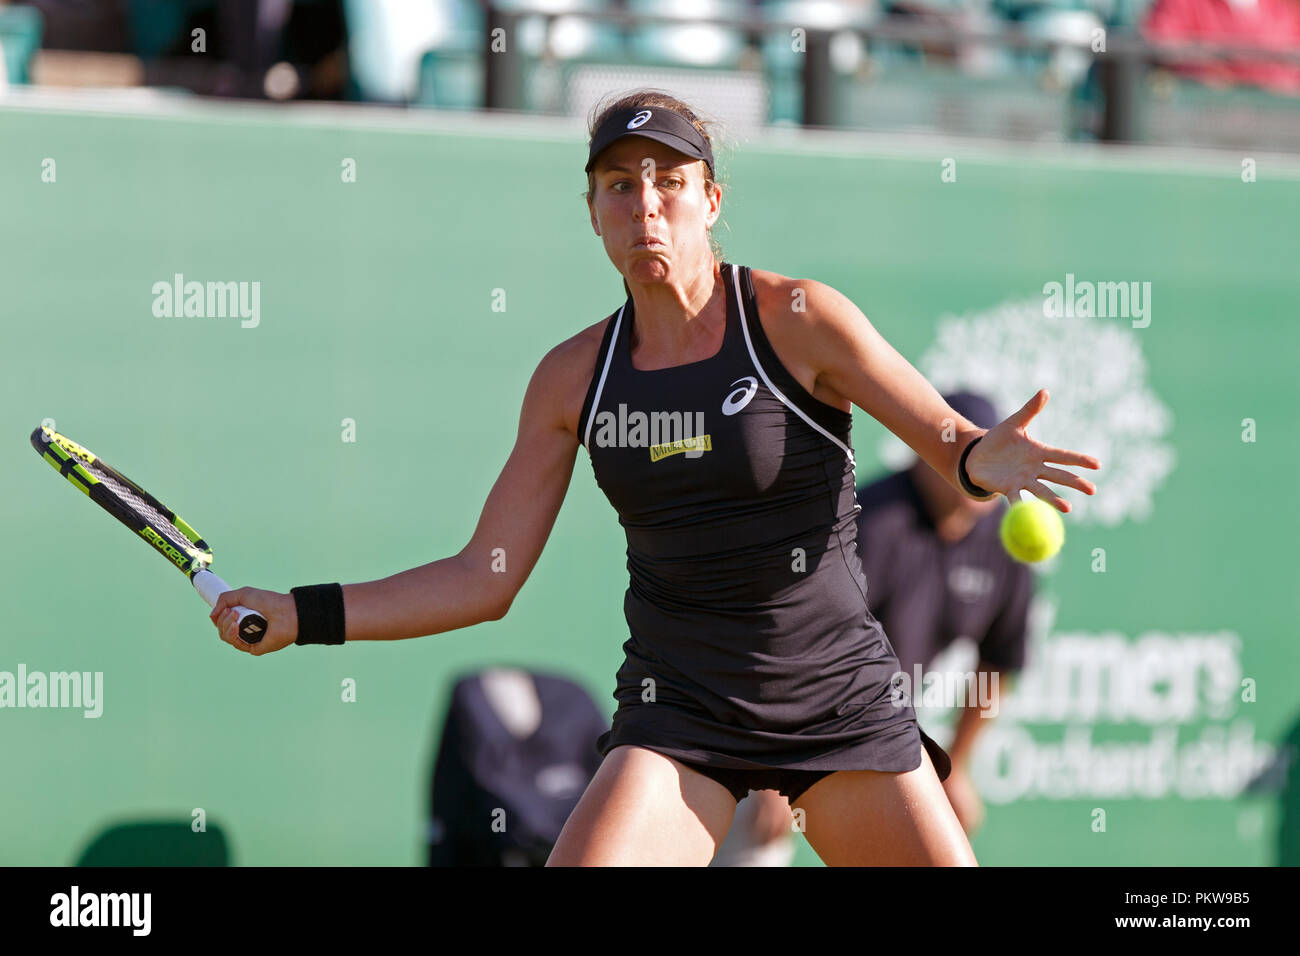 British tennis player Johanna Konta (Jo Konta) playing a forehand shot during a professional singles match in 2018. Stock Photo